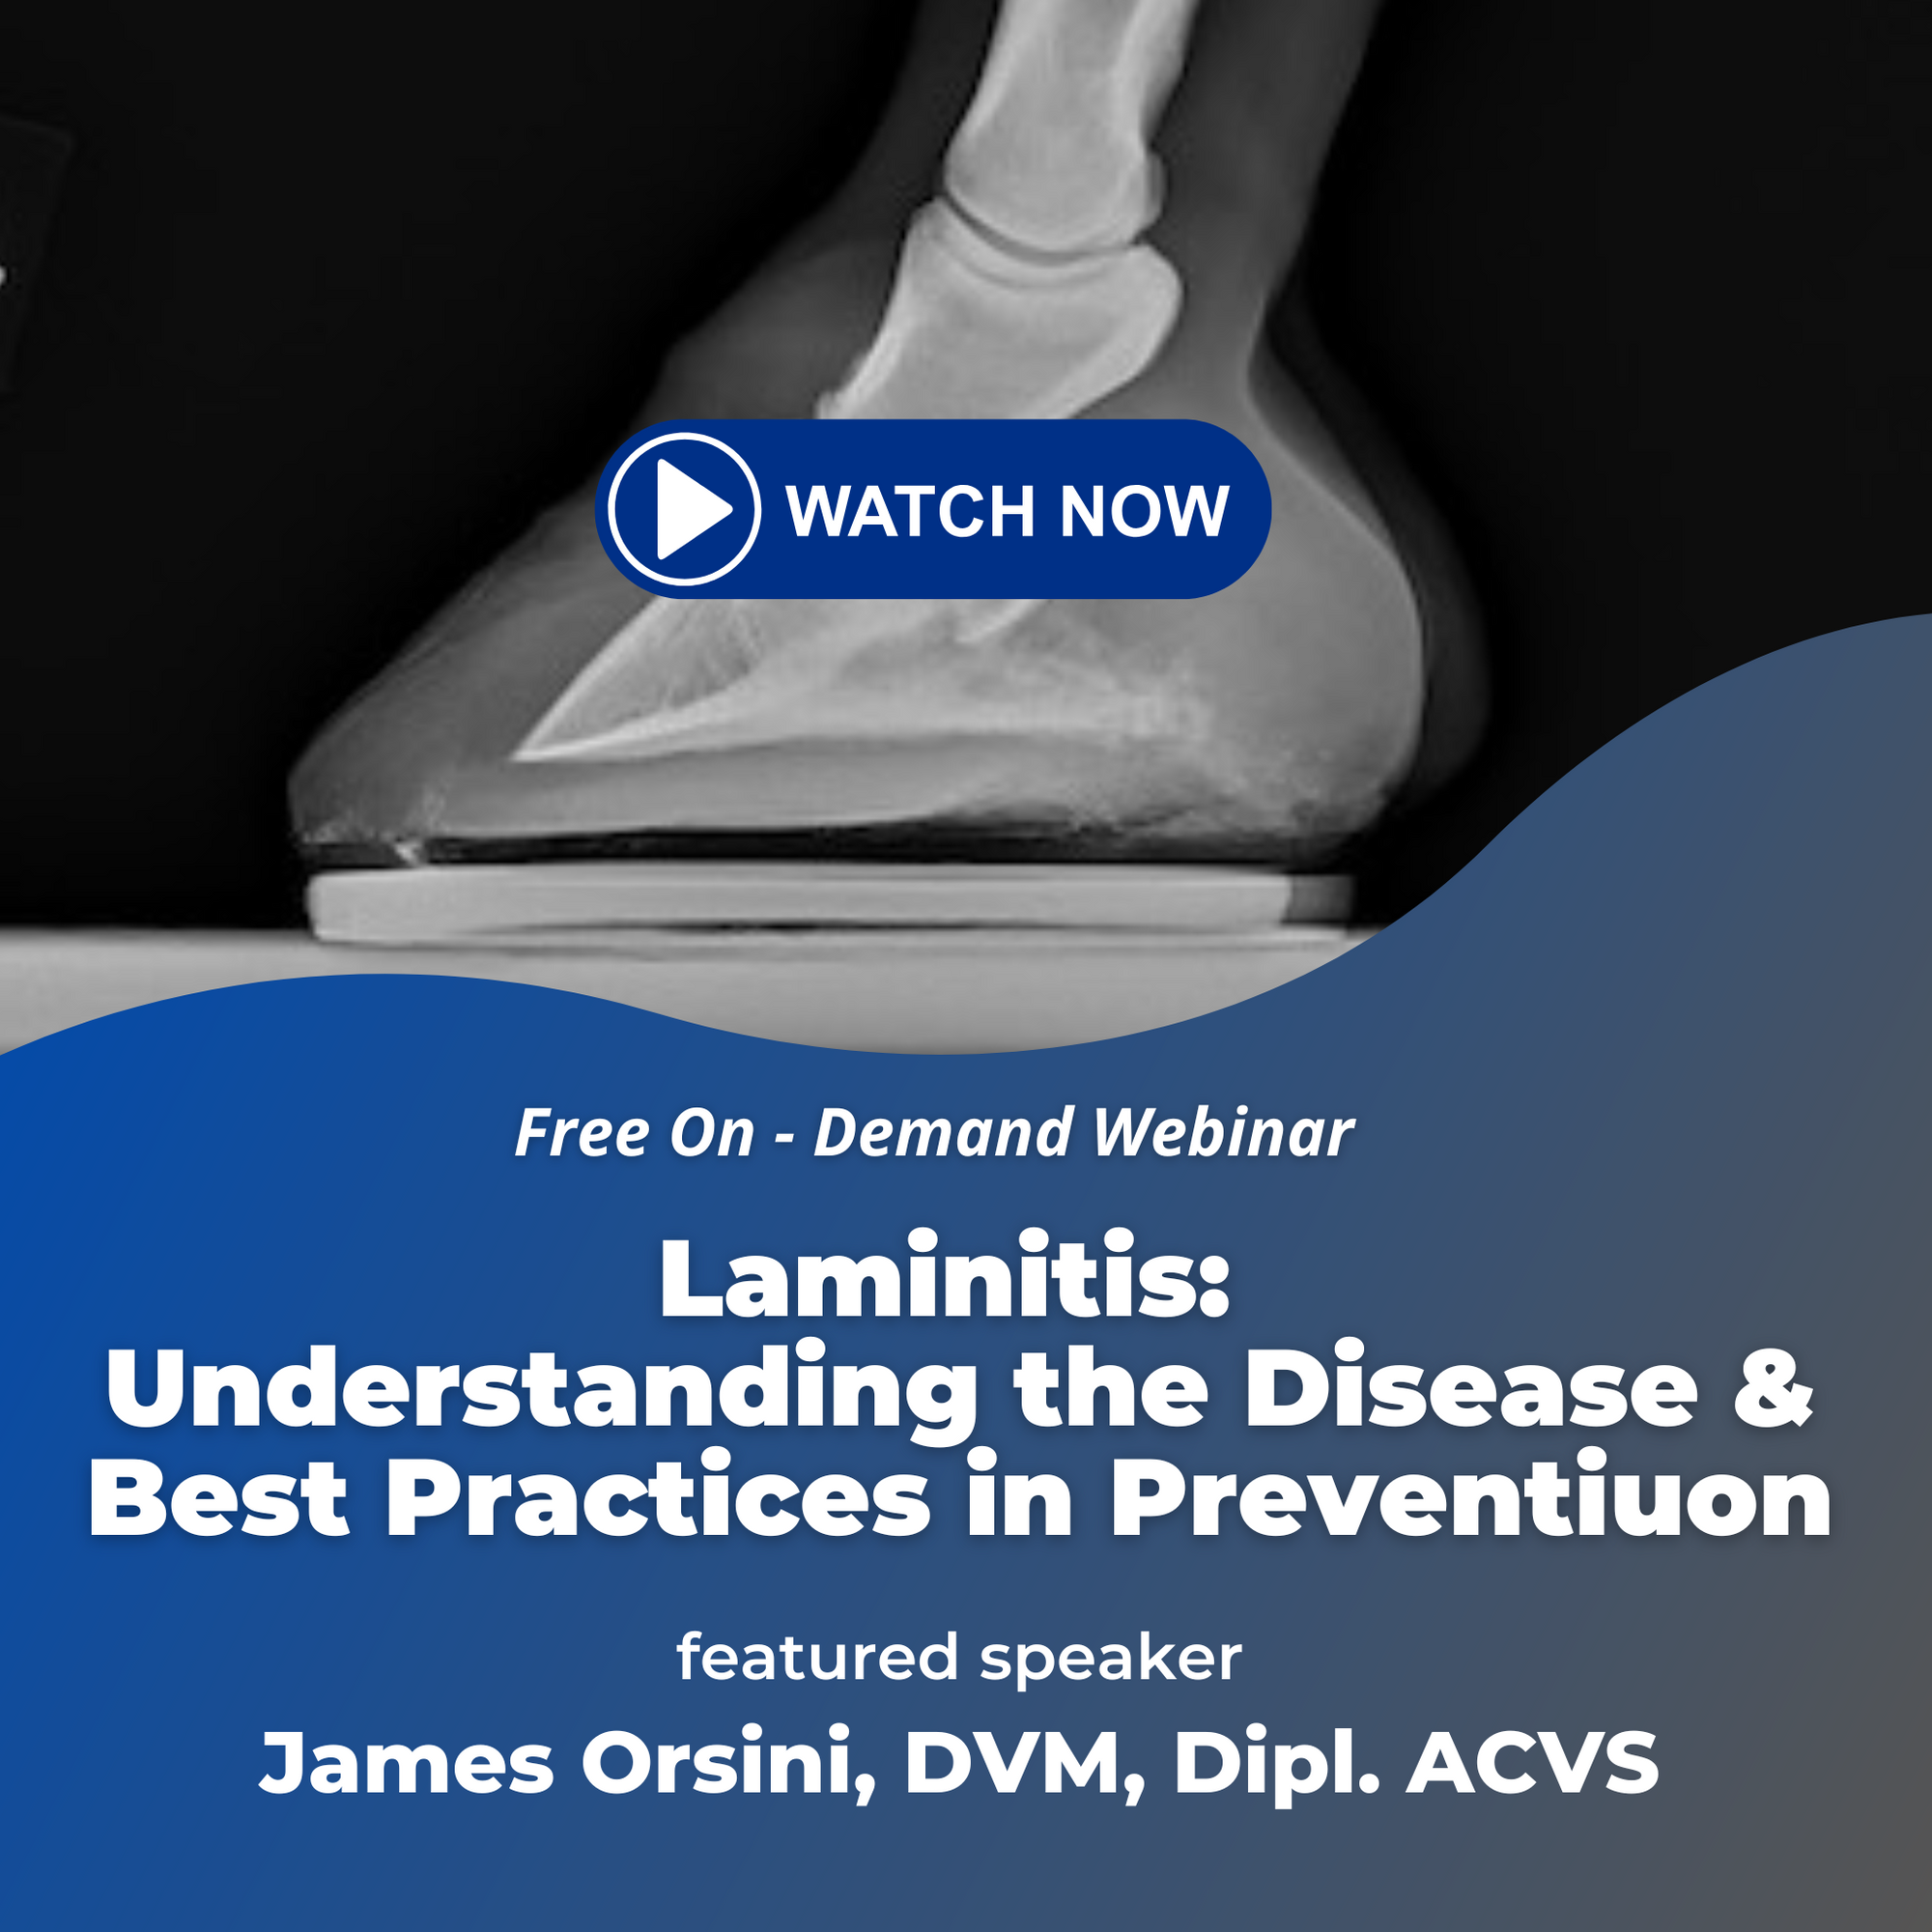 Laminitis: Understanding the Disease and Best Practices in Prevention